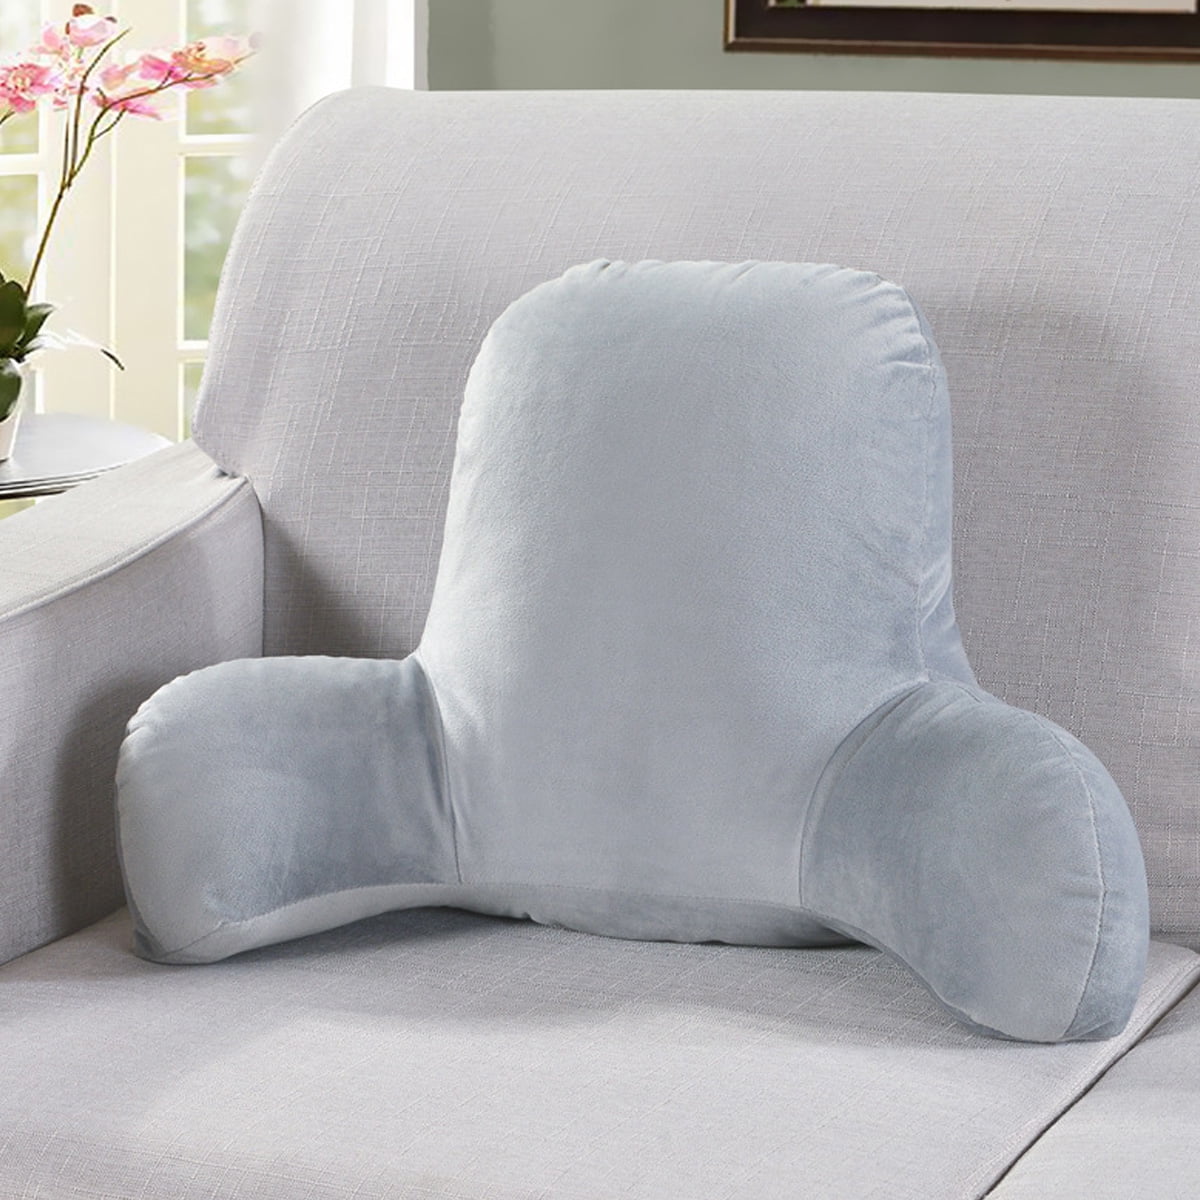 Wellnes Bed Rest Pillow Backrest Back Arm Support Reading Lounge Gray Pillow New 